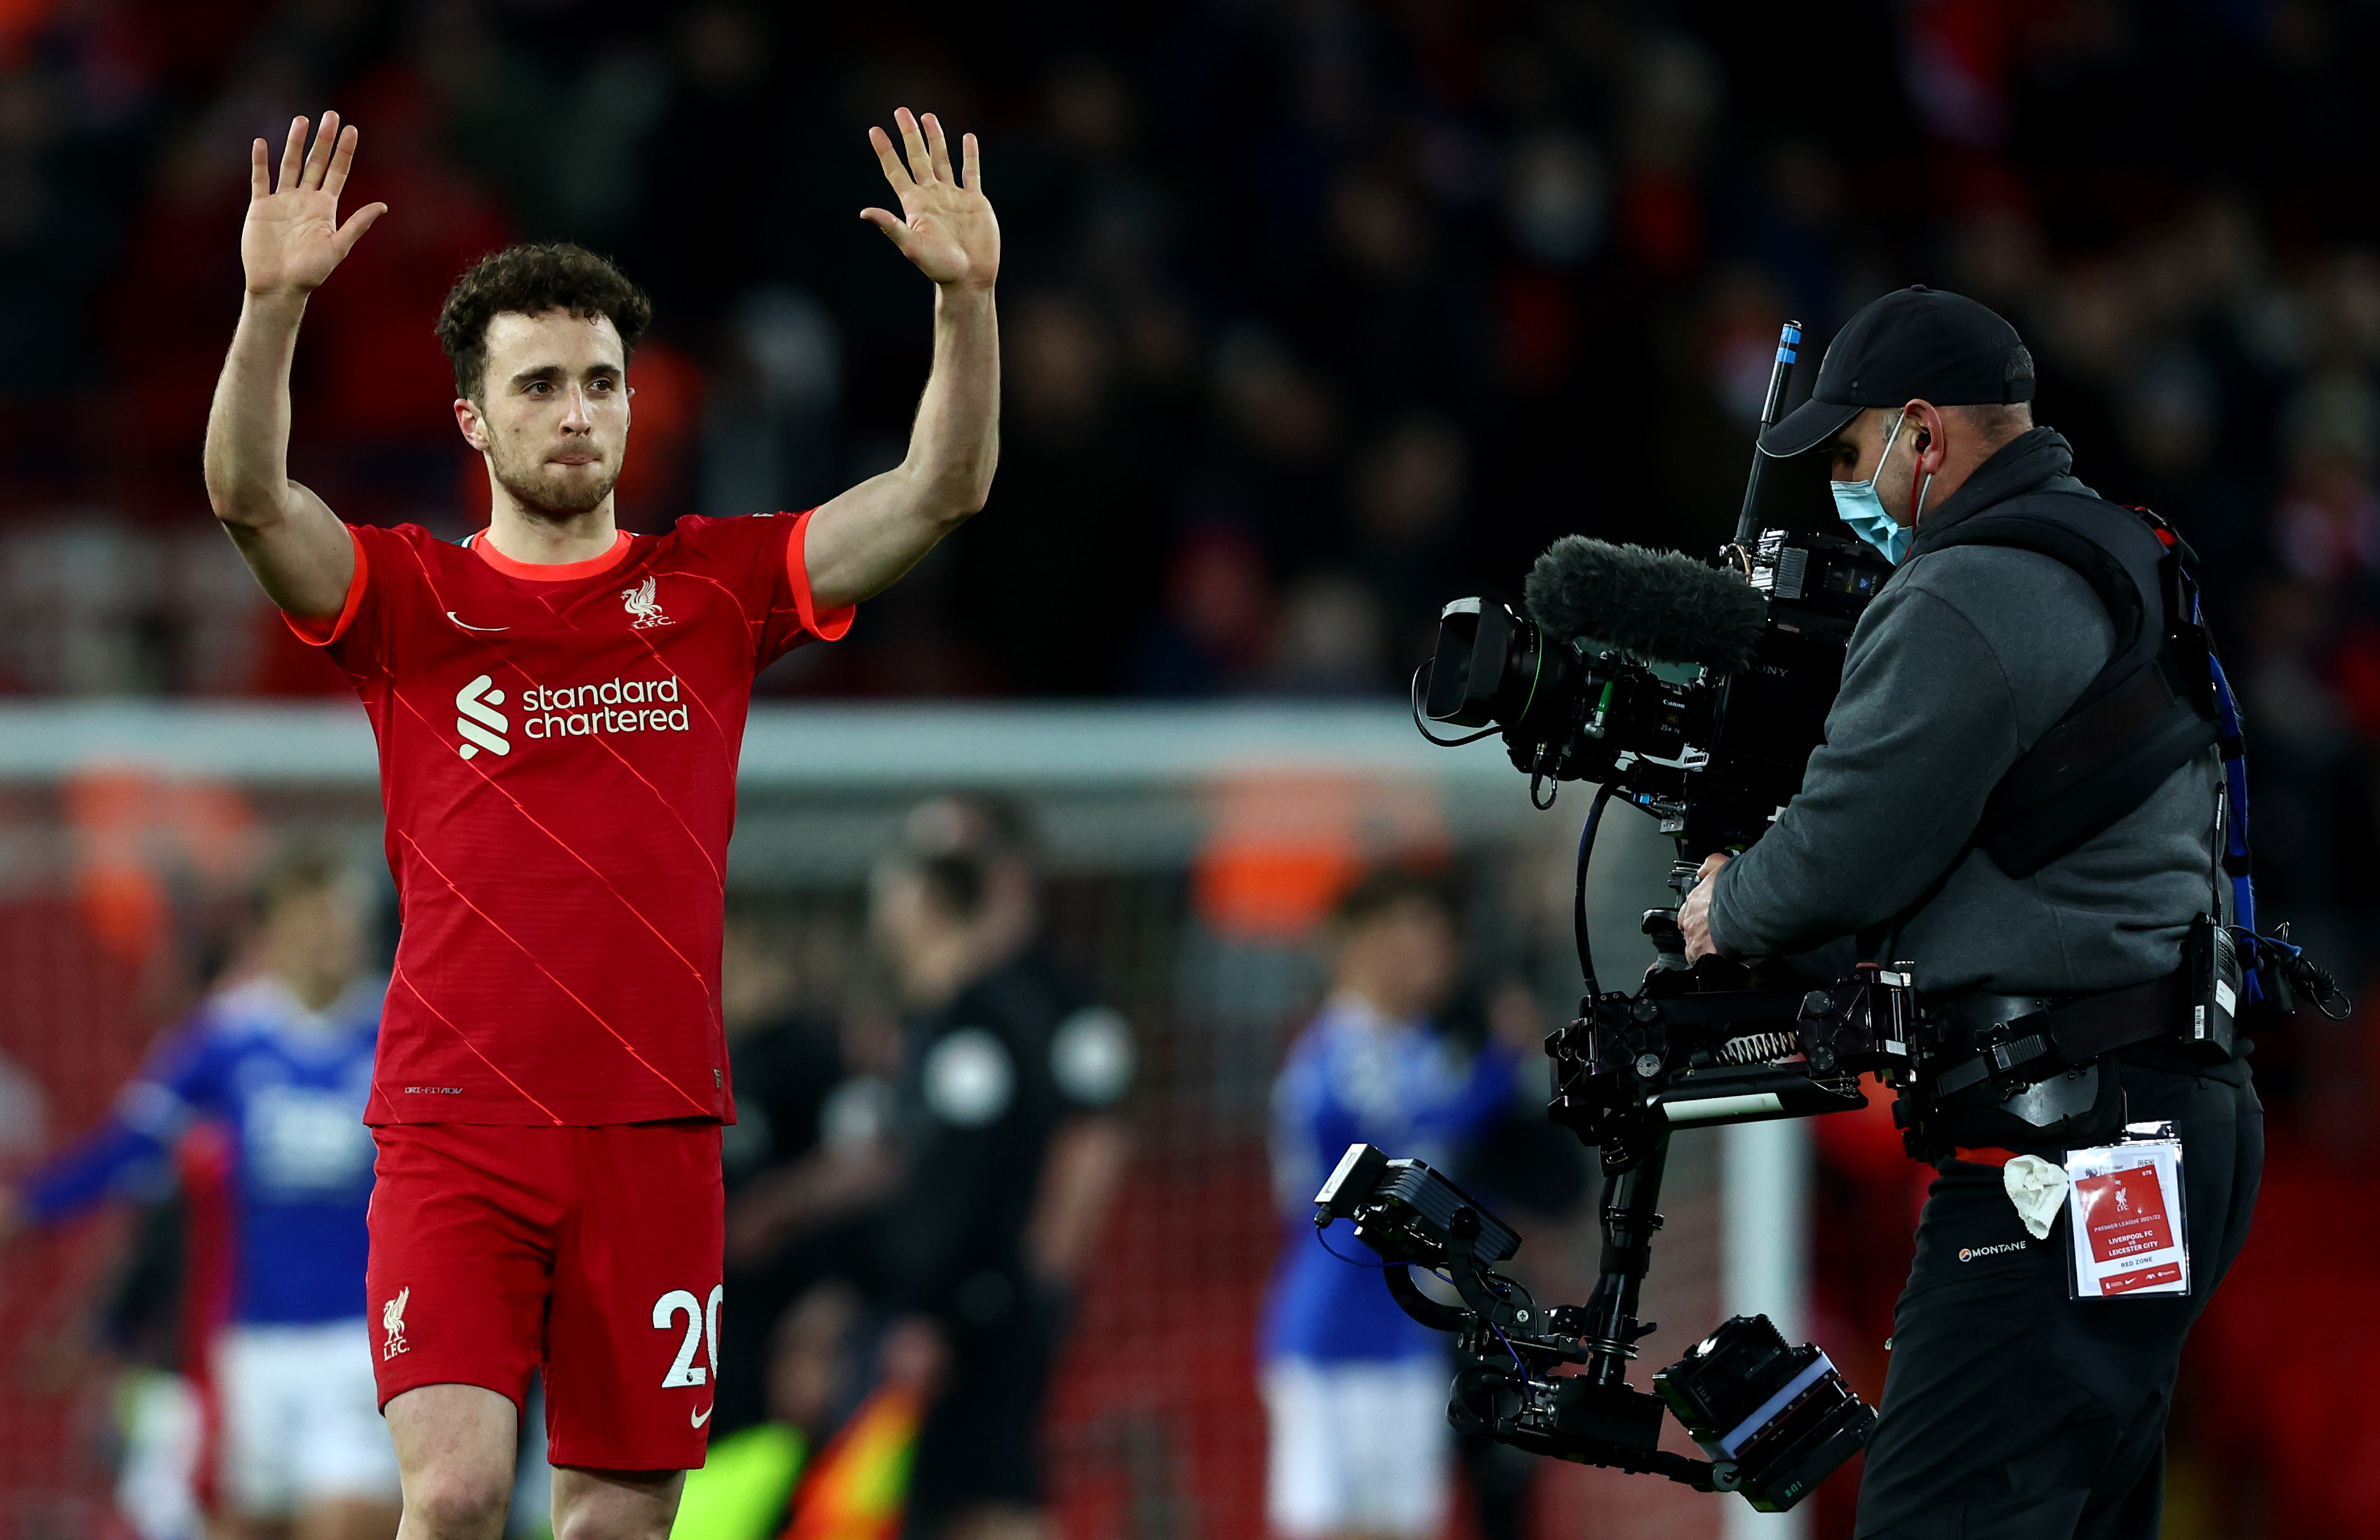 ‘I never thought I’d see it’ – Ex-PL striker surprised at what Diogo Jota has done since arriving at Liverpool